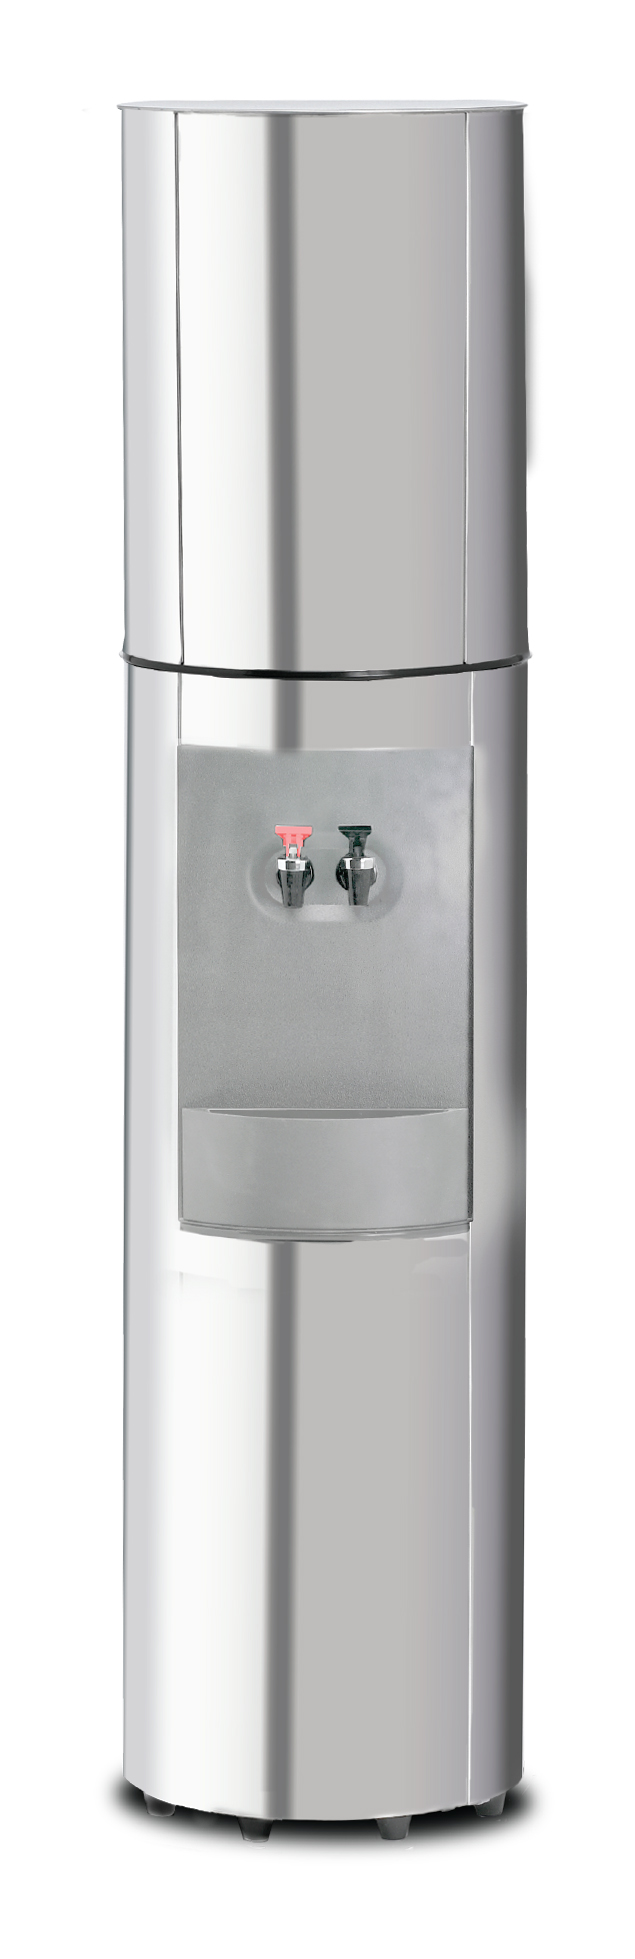 Triple S2 Stainless Steel Bottleless Water Cooler with Hot & Cold Water